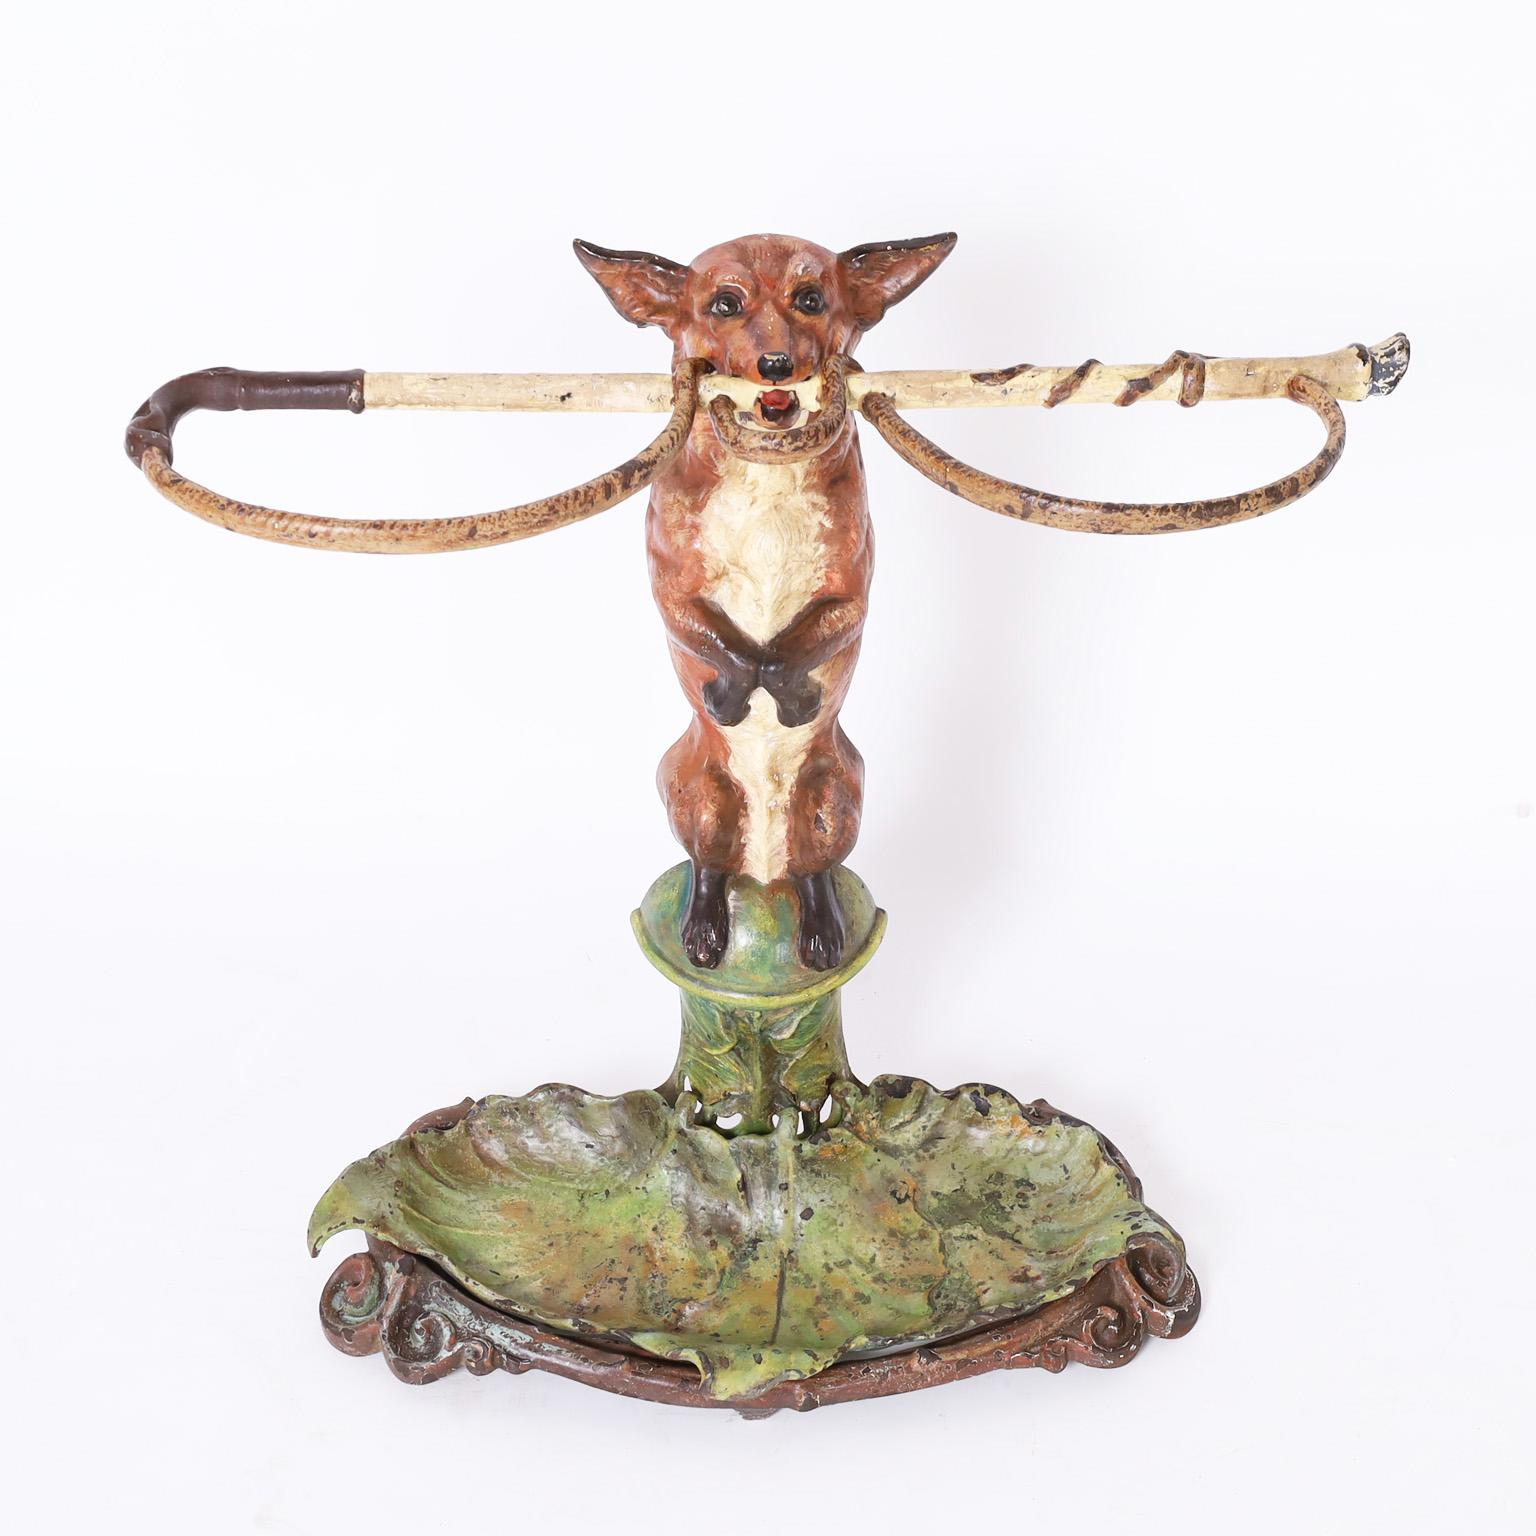 Outfoxed by a 19th century English cast iron umbrella stand, retaining its original paint, of a fox holding in its teeth a hunting whip or crop over a removable leaf form water tray.